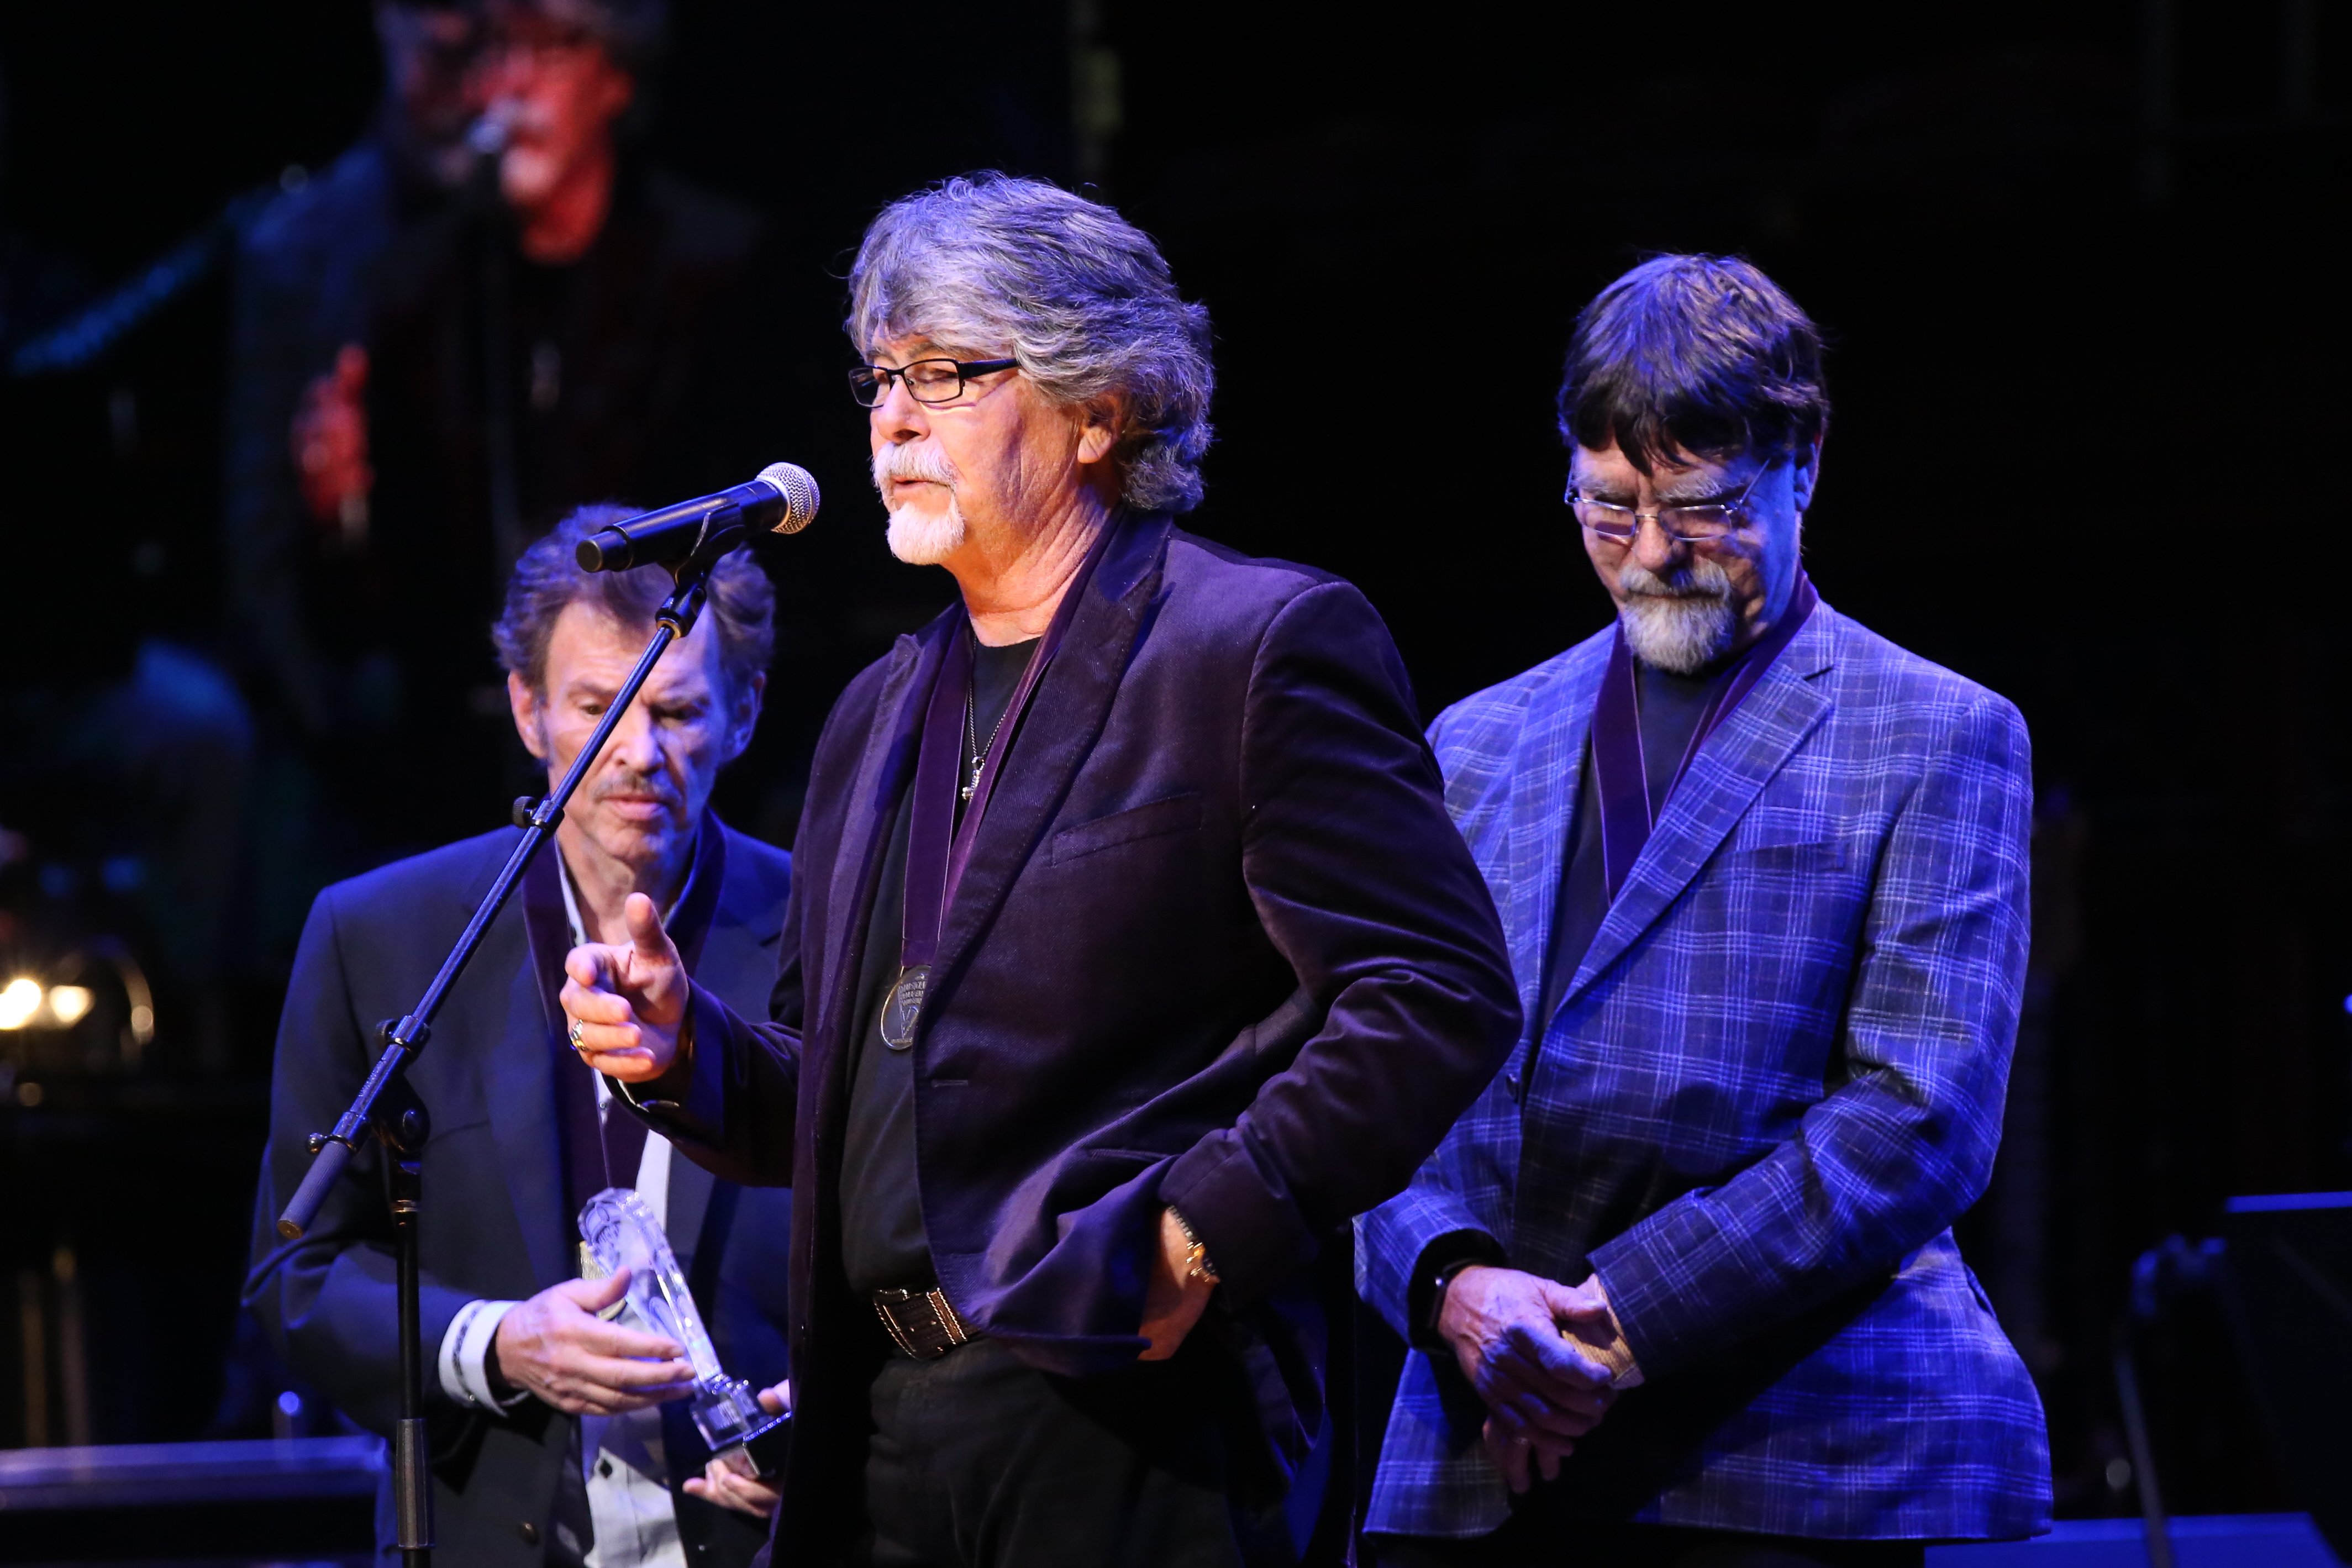 |Jeff Cook, Randy Owen and Teddy Gentry of Alabama speak onstage during the 2019 Musicians Hall of Fame Induction Ceremony & Concert at Schermerhorn Symphony Center on October 22, 2019 in Nashville, Tennessee | Source: Getty Images 